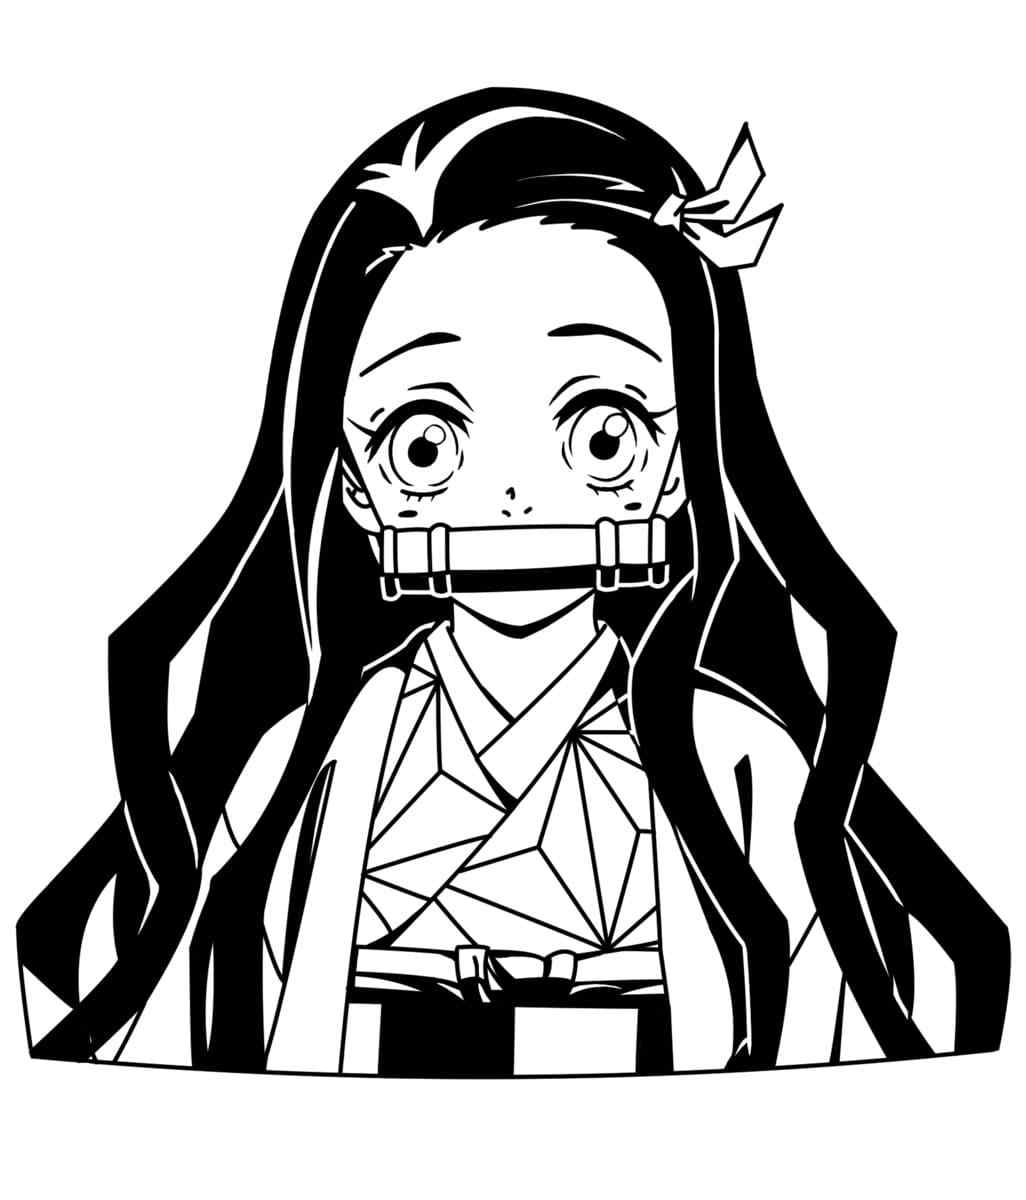 Nezuko Was An Attractive Girl Coloring Pages   Coloring Cool